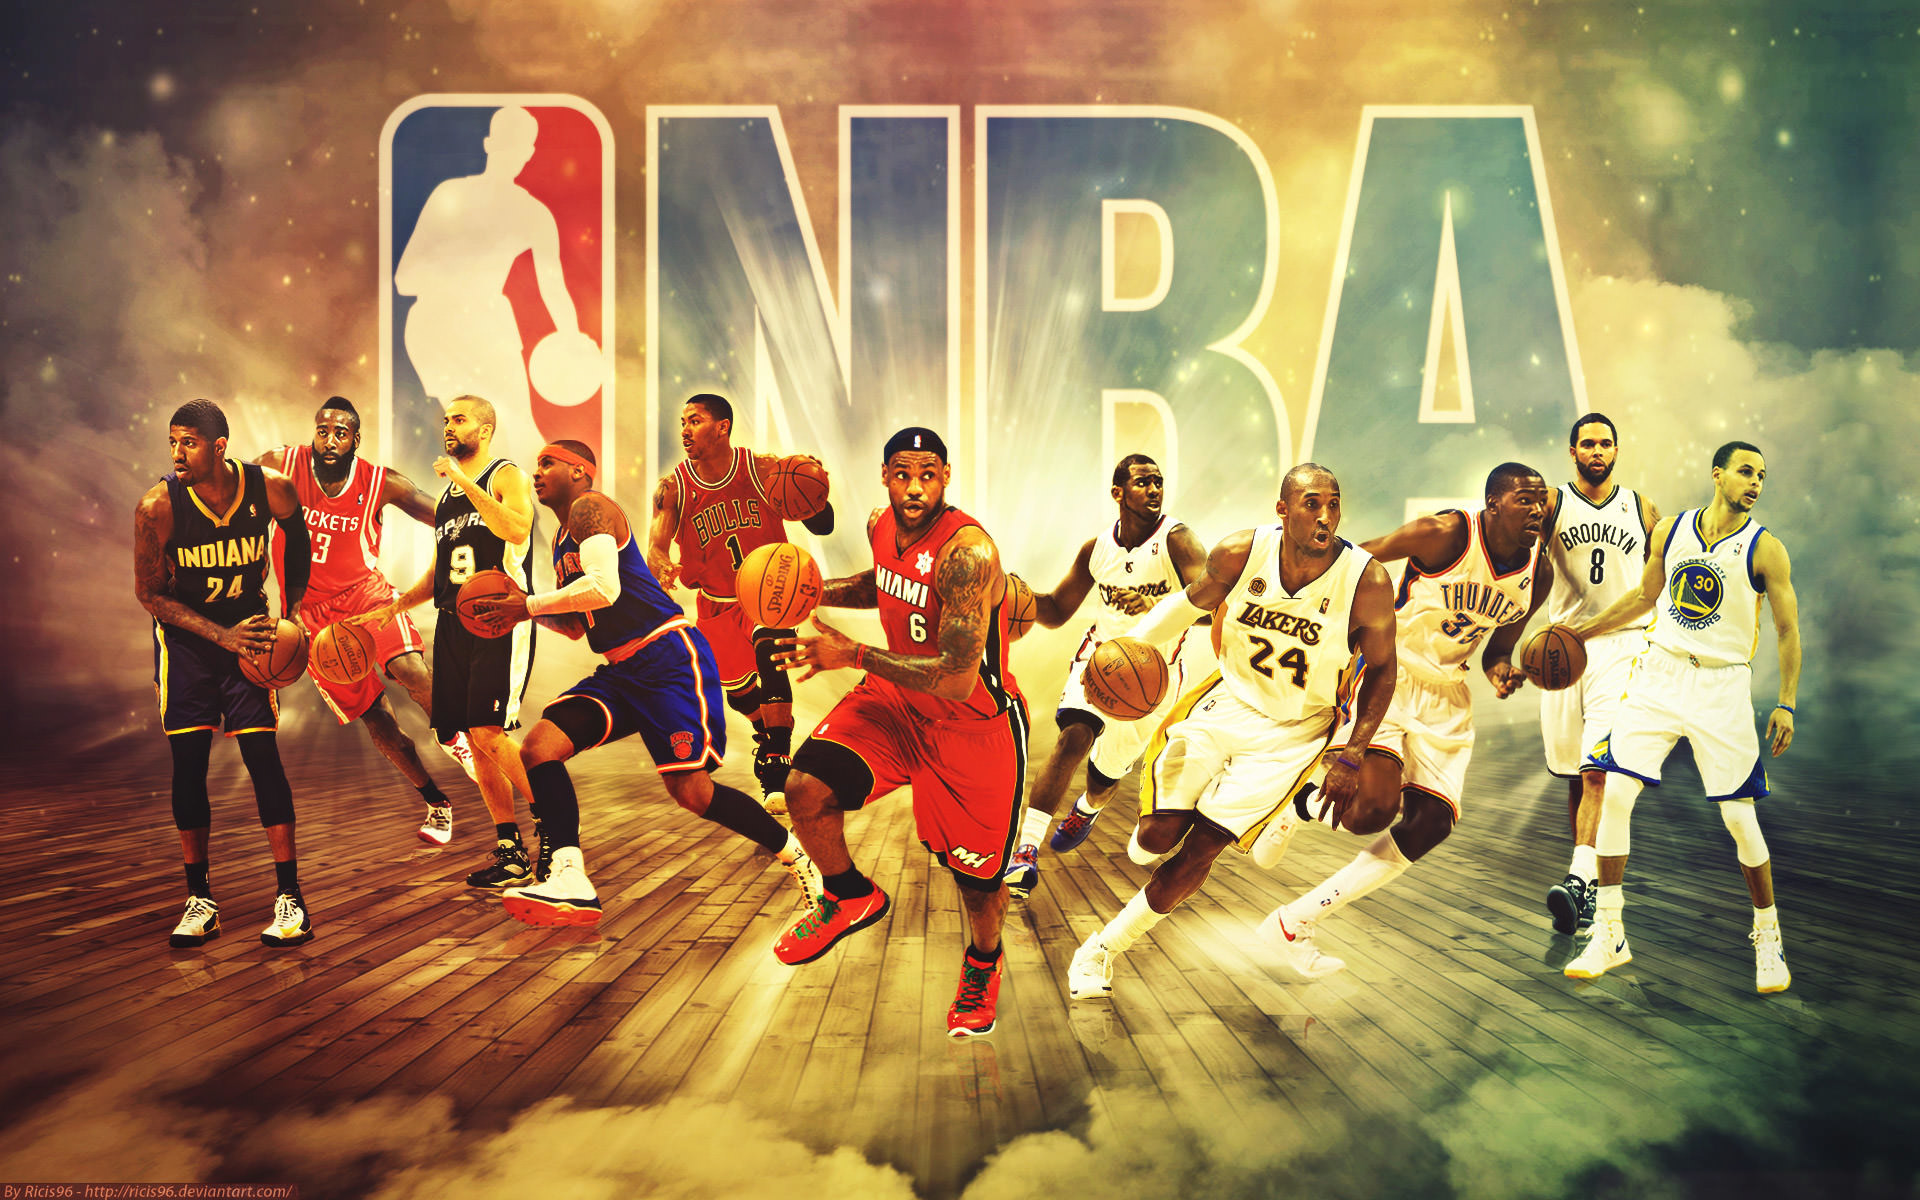 1920x1200 Basketball wallpapers sports backgrounds images pictures jpg  Awesome  basketball backgrounds